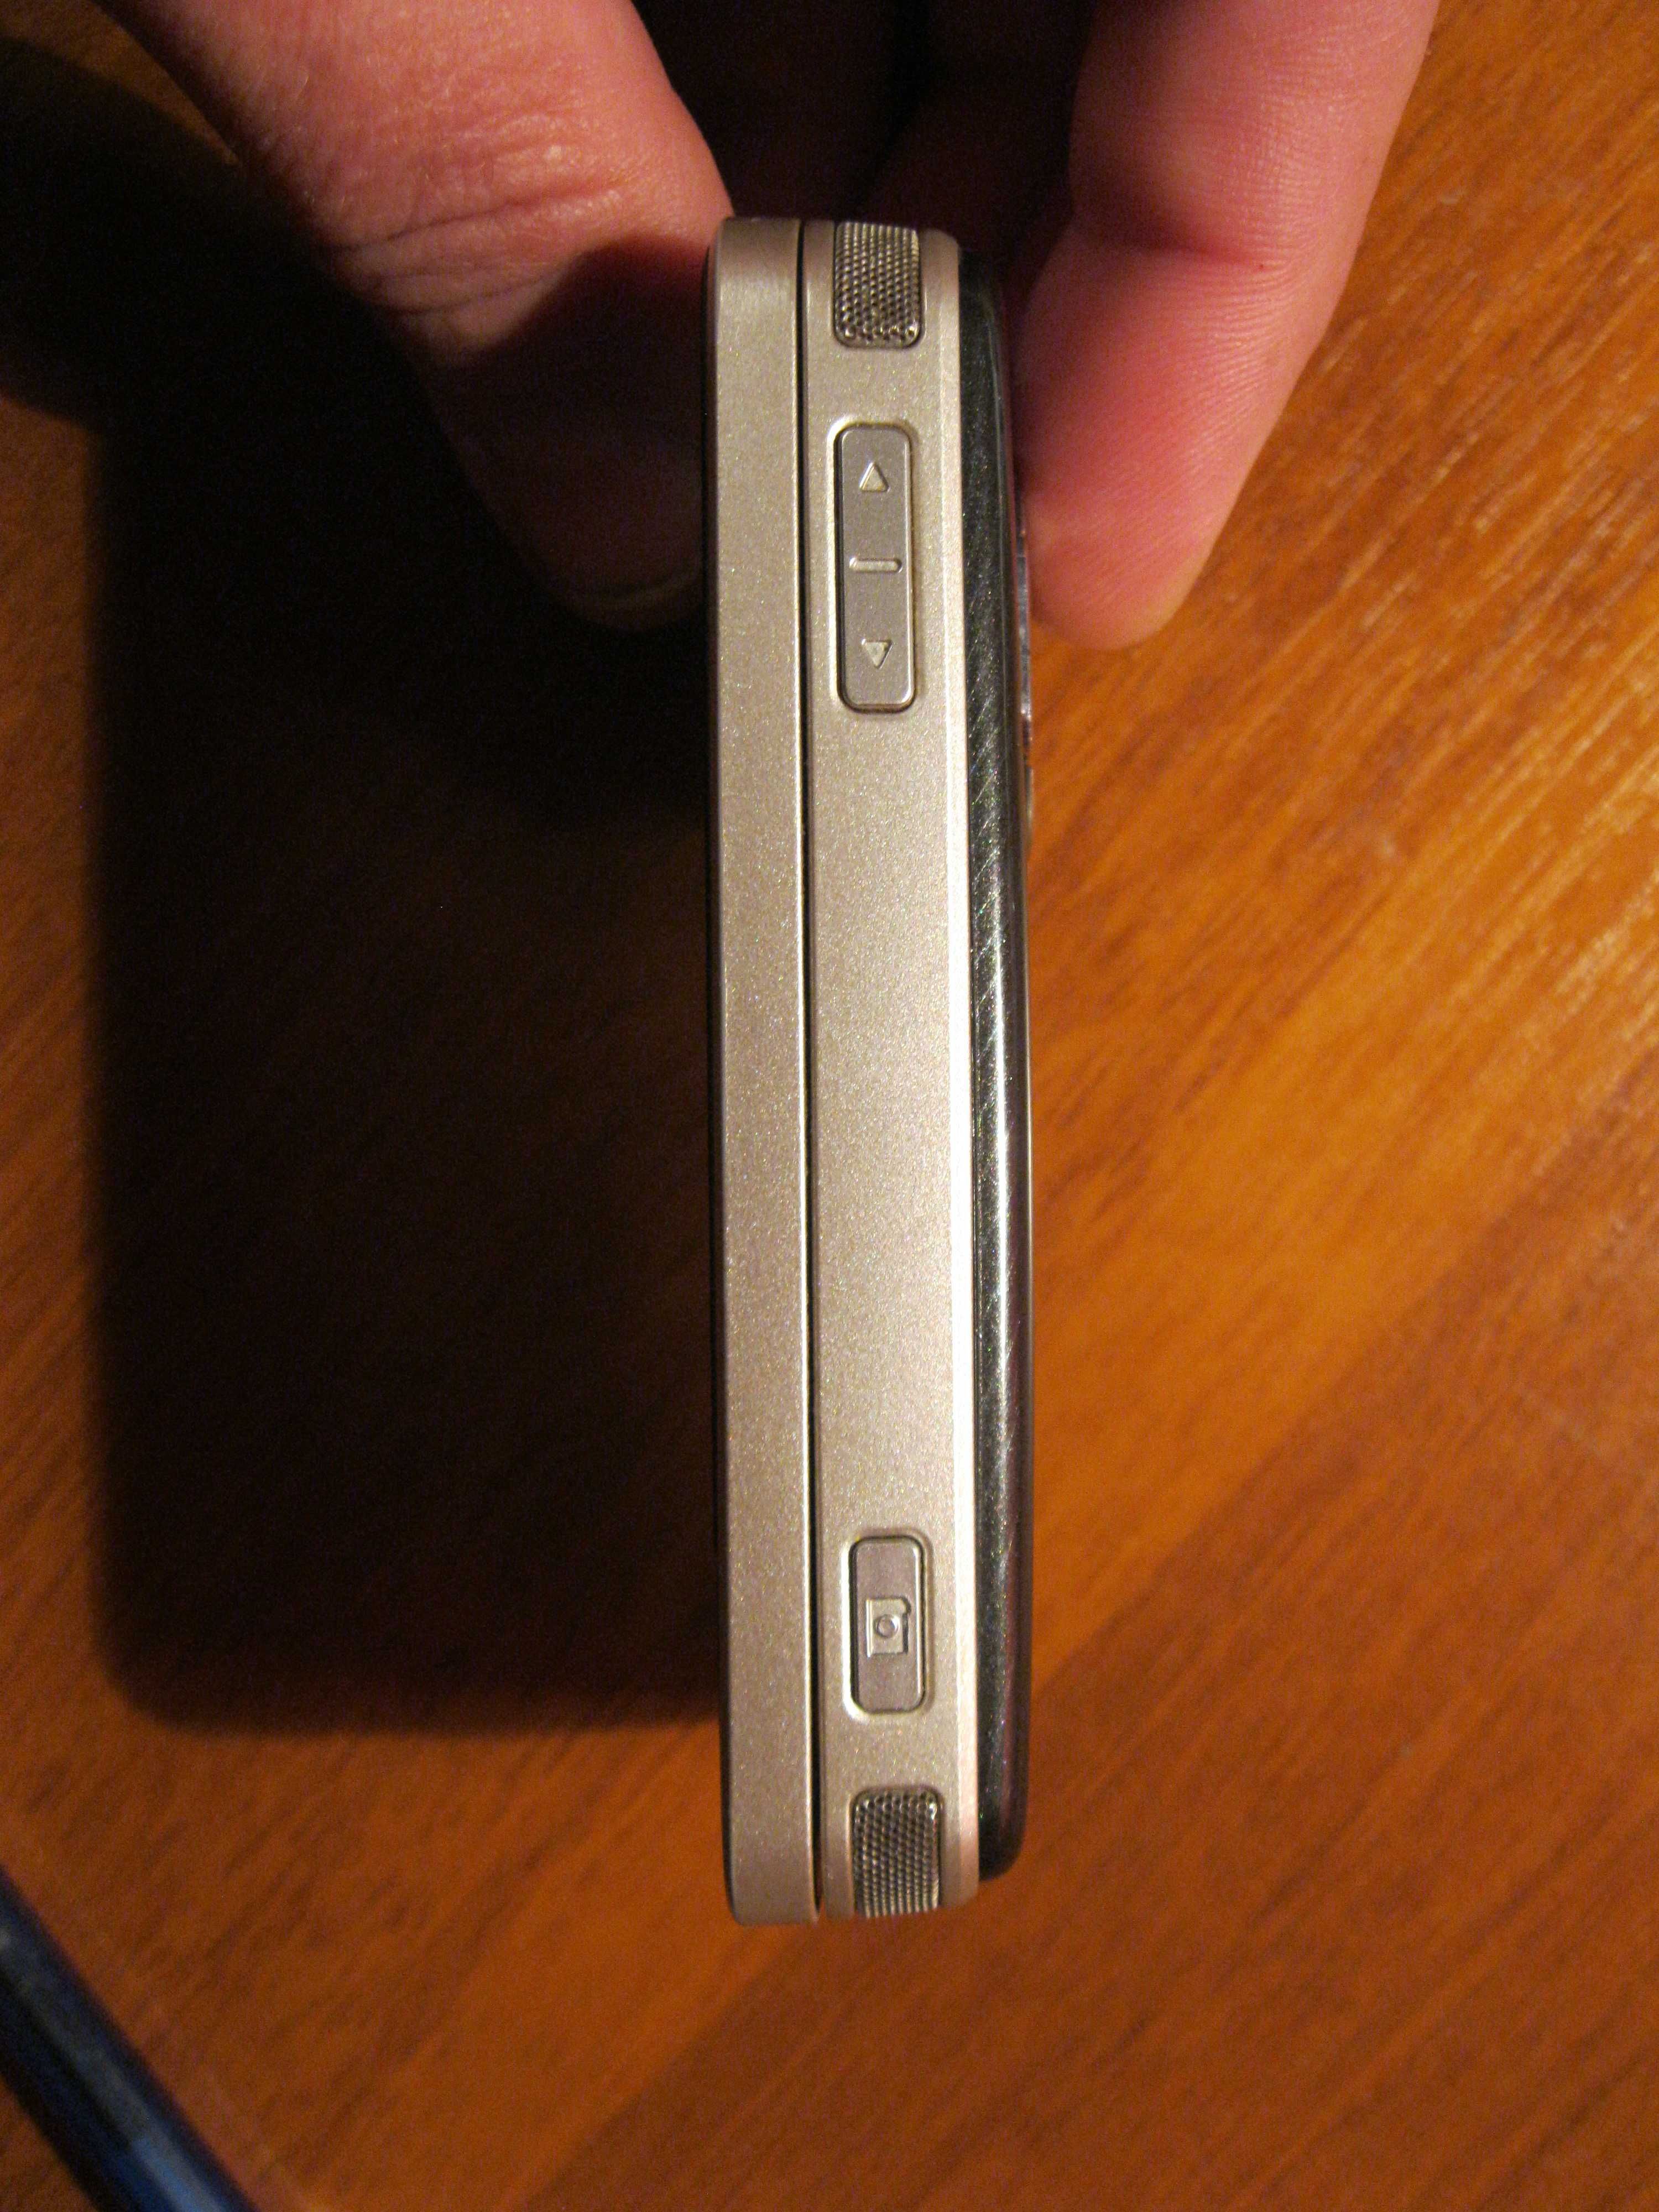 Nokia N96 (Made in Finland)